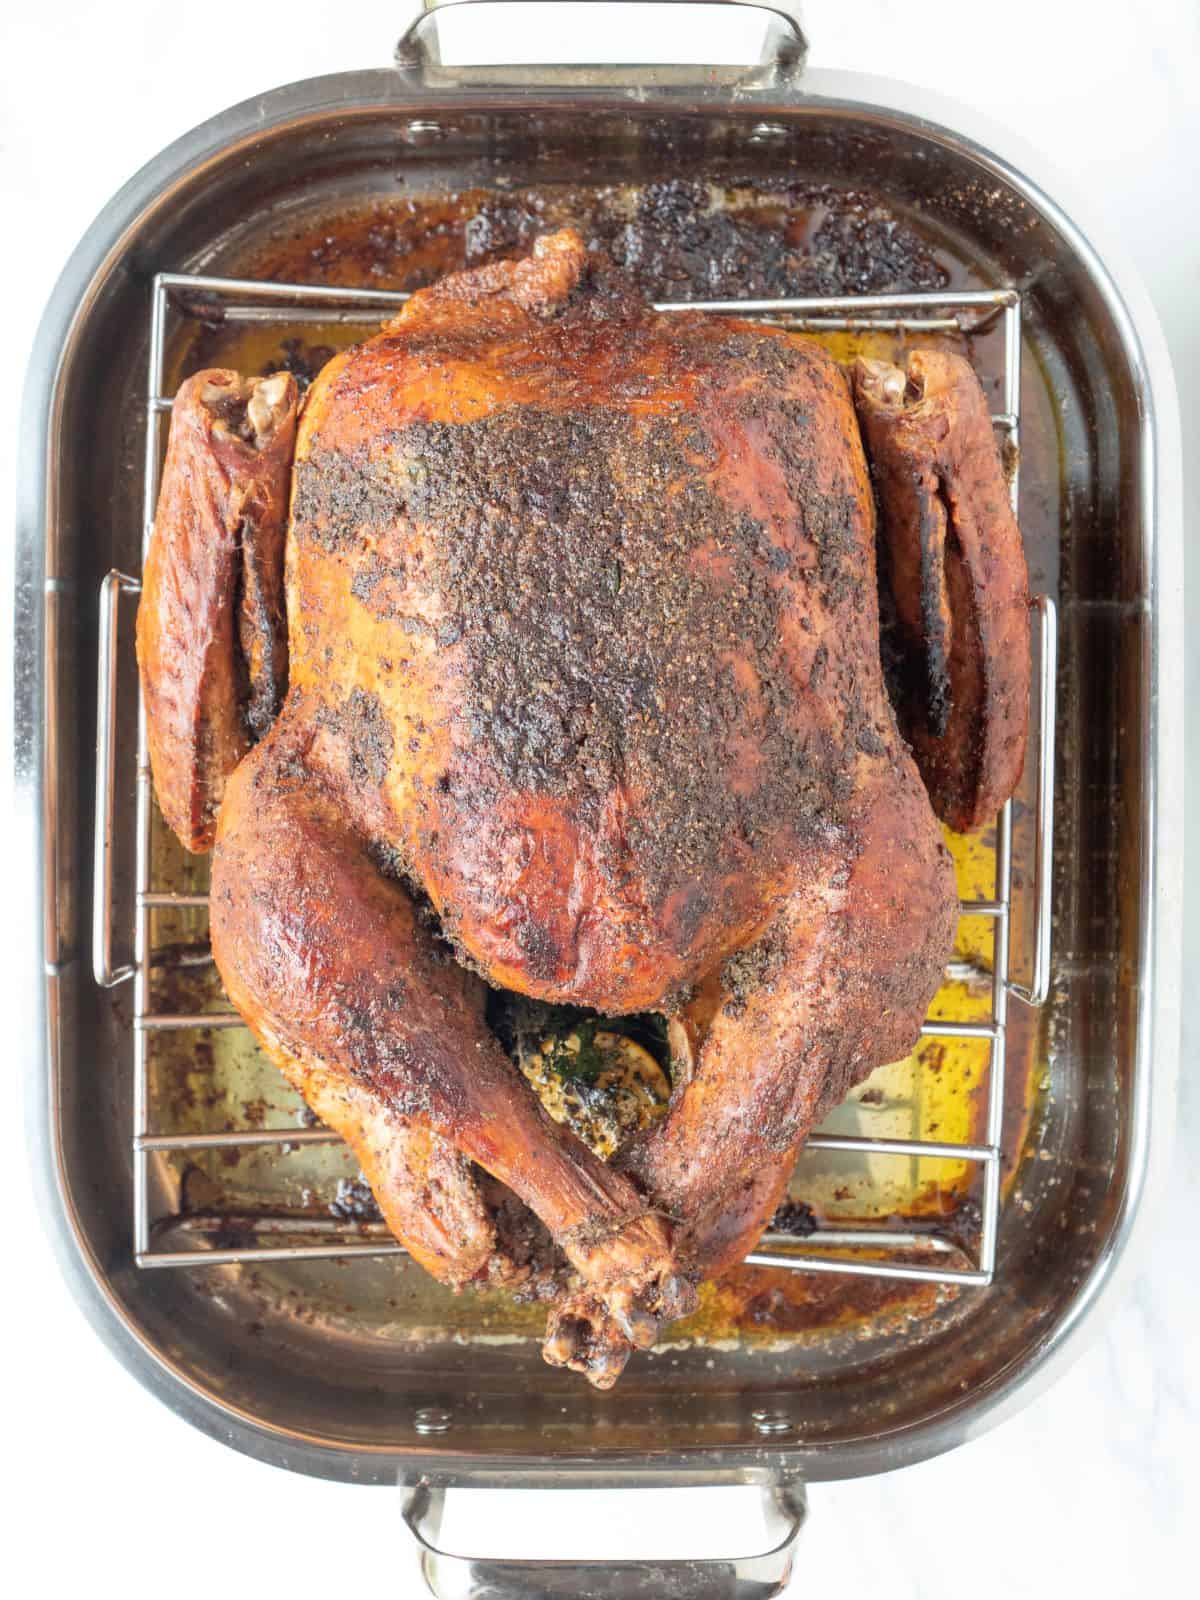 A roasting pan with a wire rack and a whole turkey placed on top, just taken out of the oven after roasting.